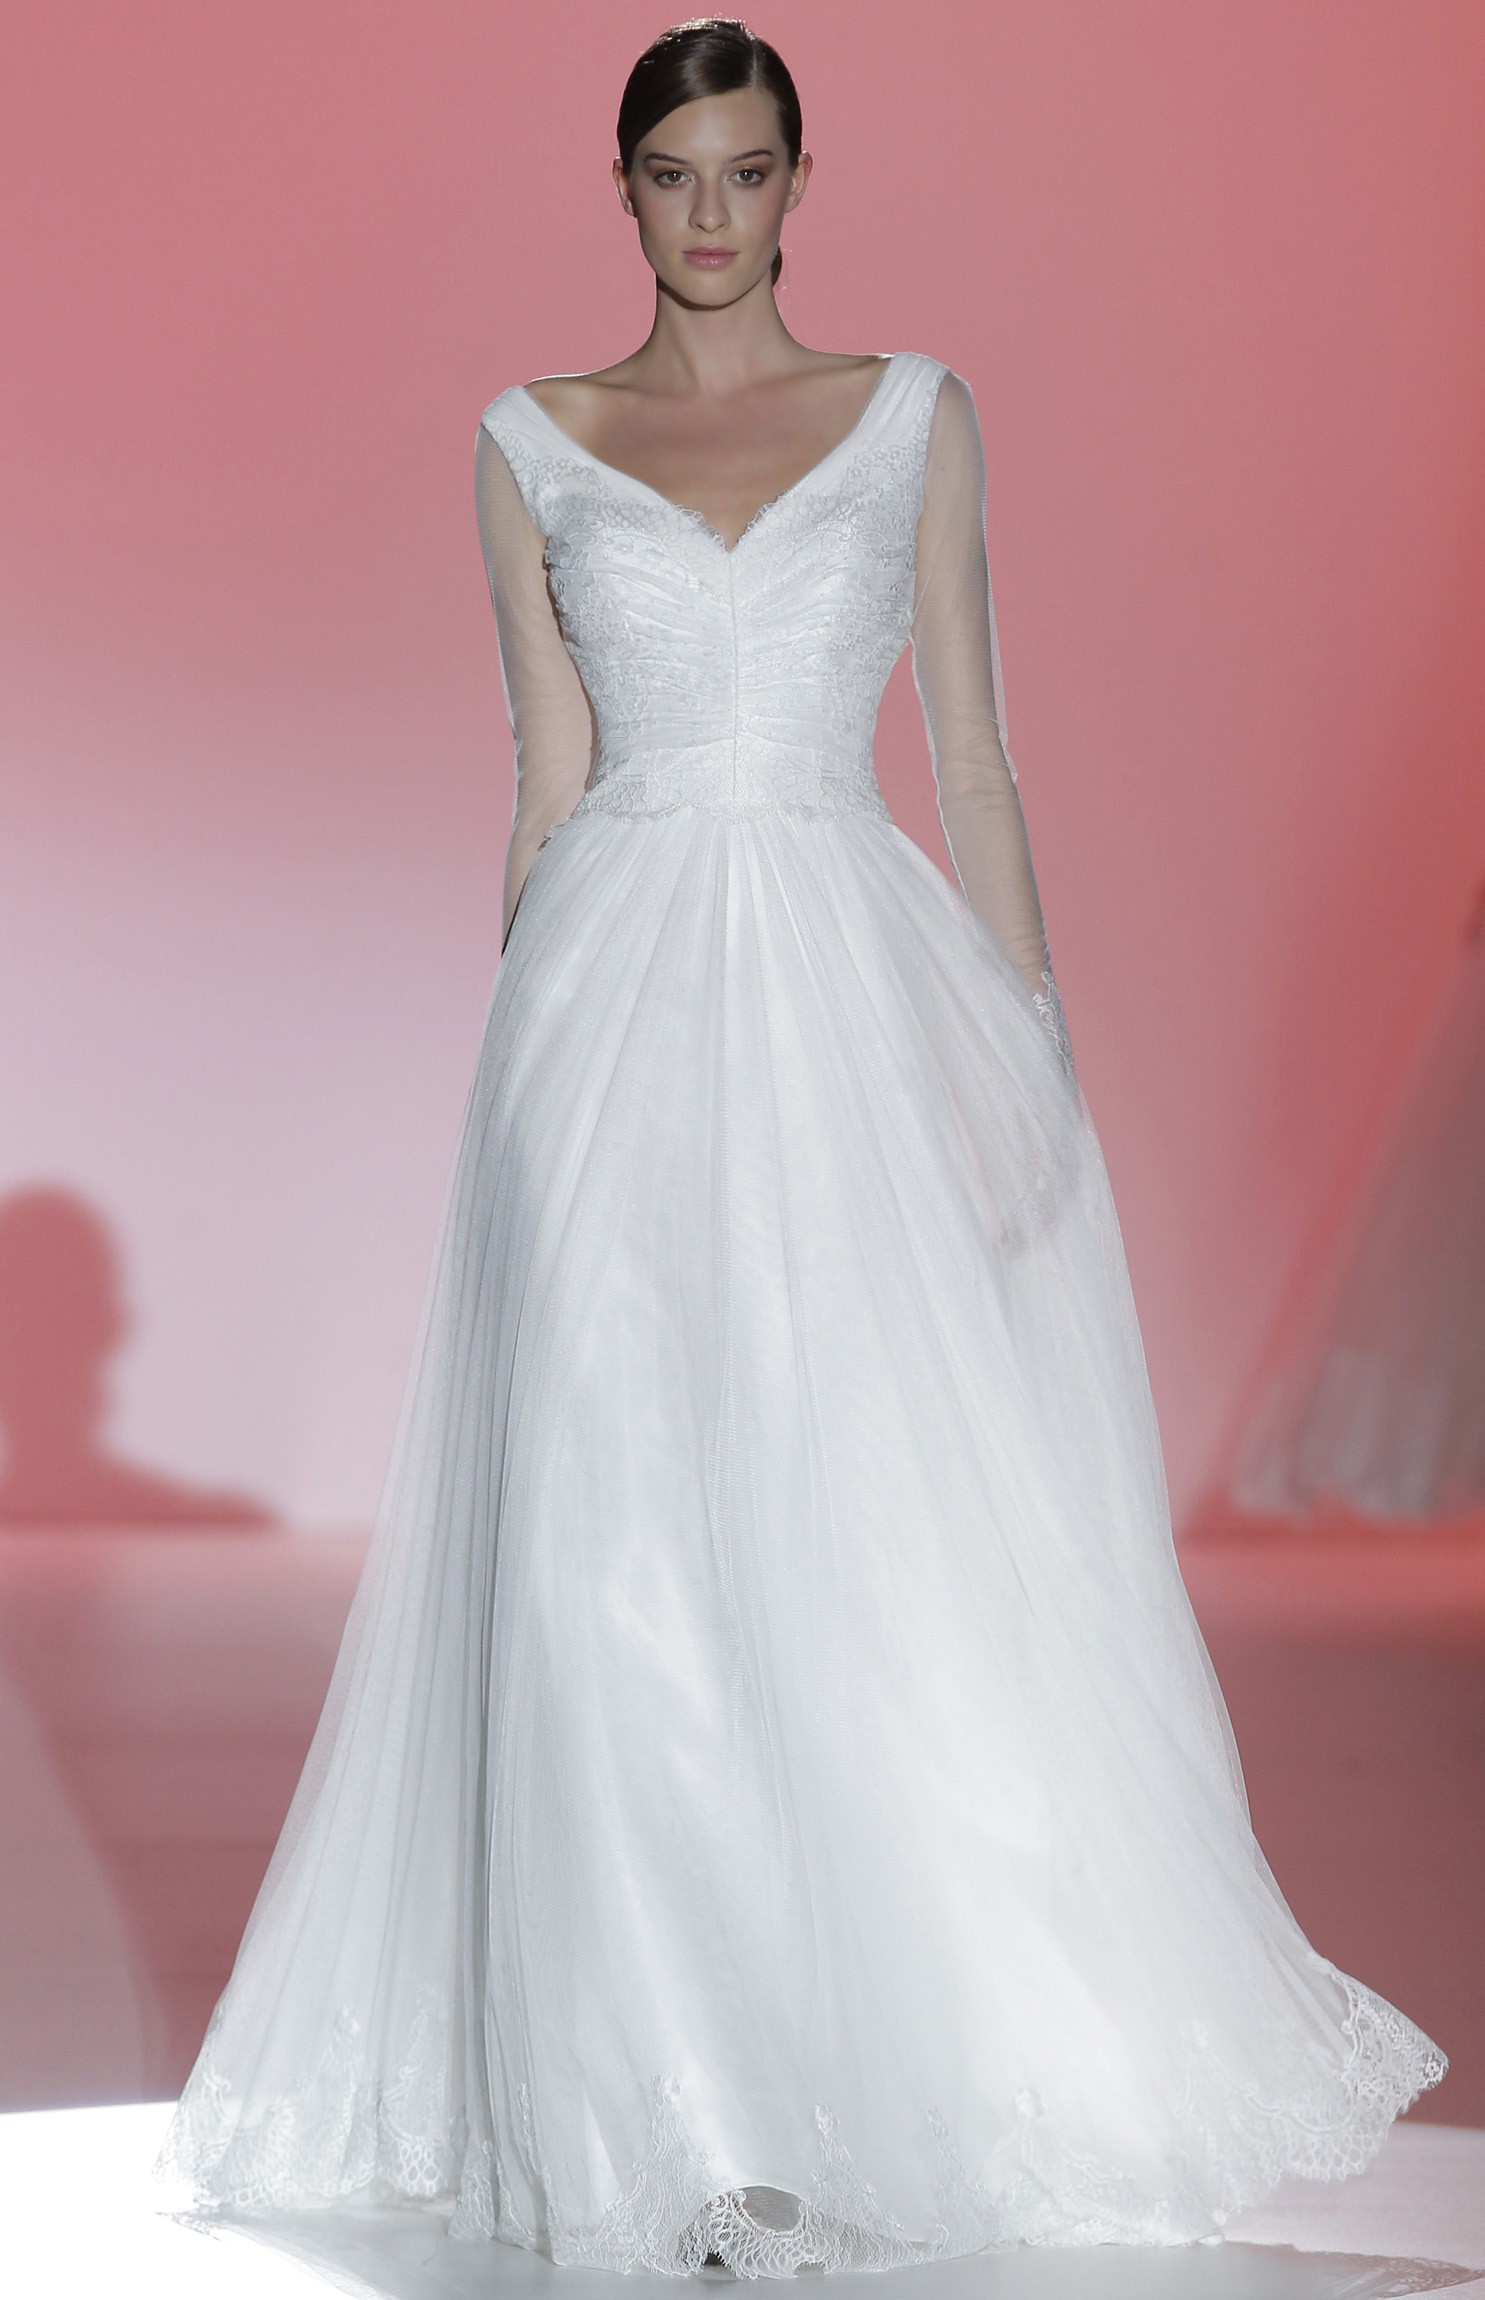 One Day   Bridal Collection 2015 by Hannibal Laguna